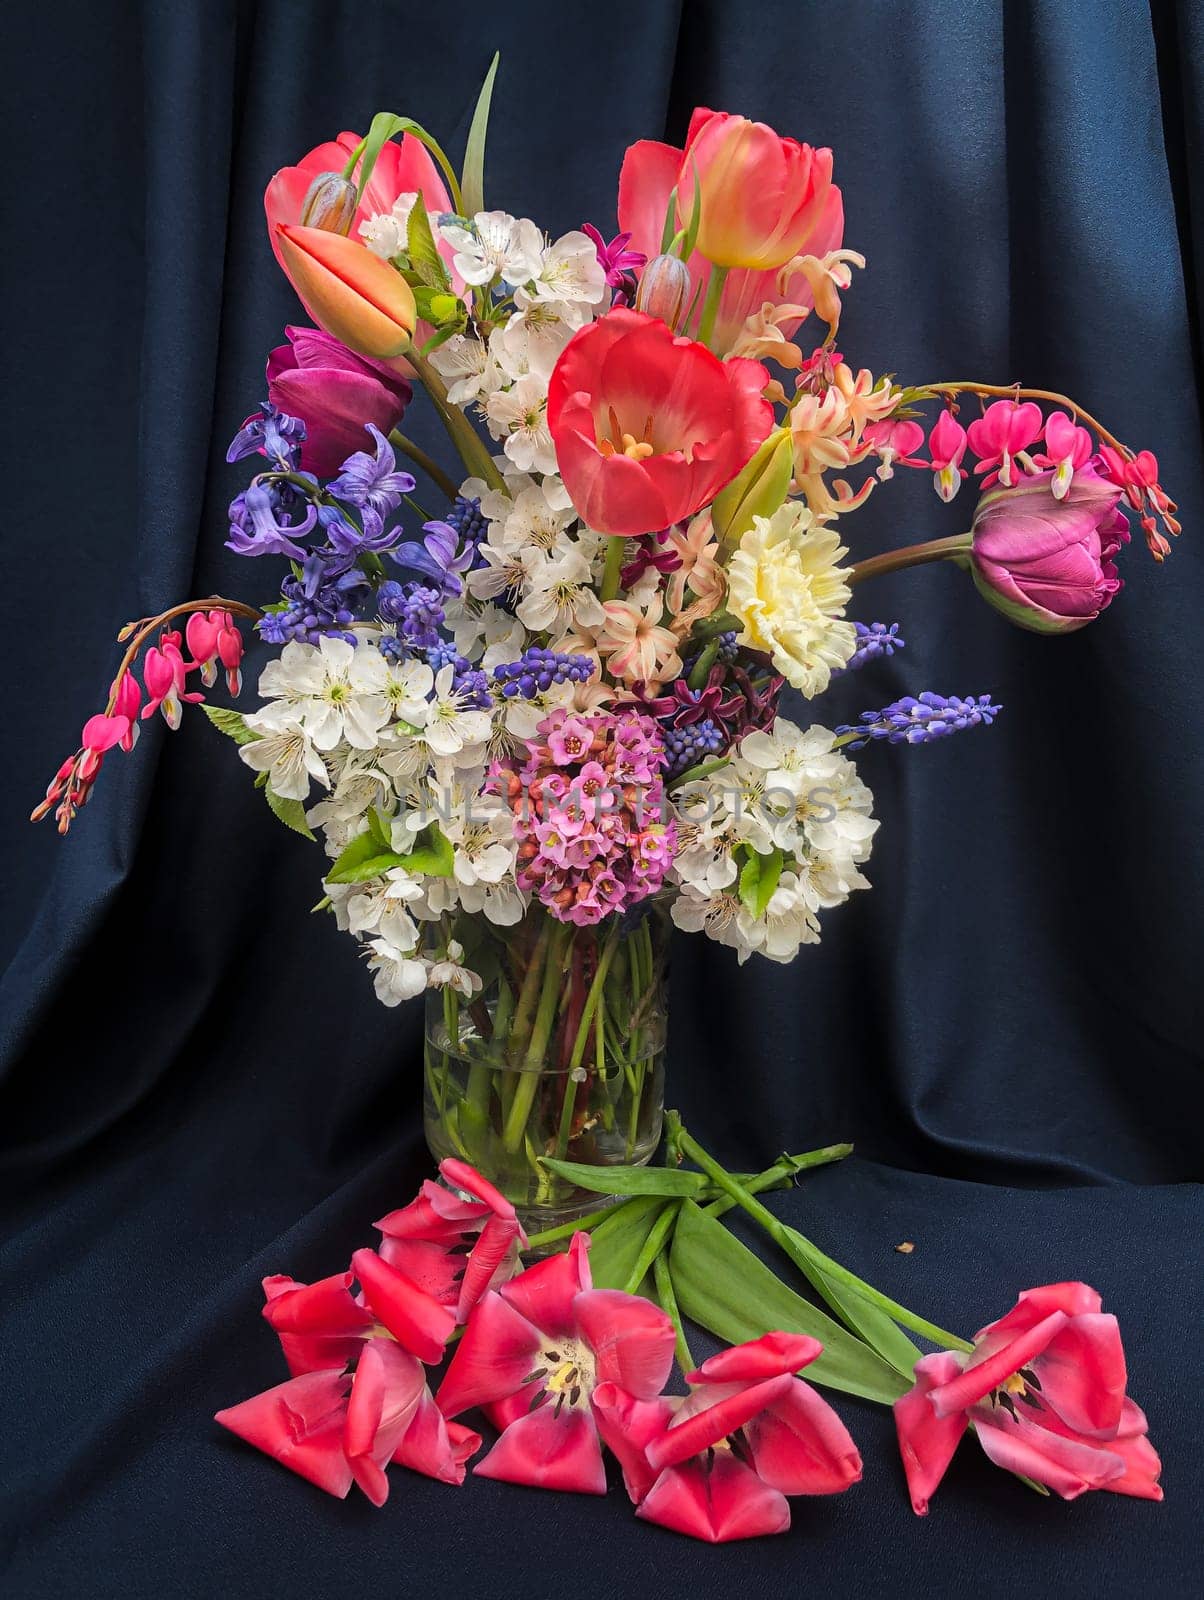 Romantic bouquet of the first garden flowers in a vase. The art of flower arranging